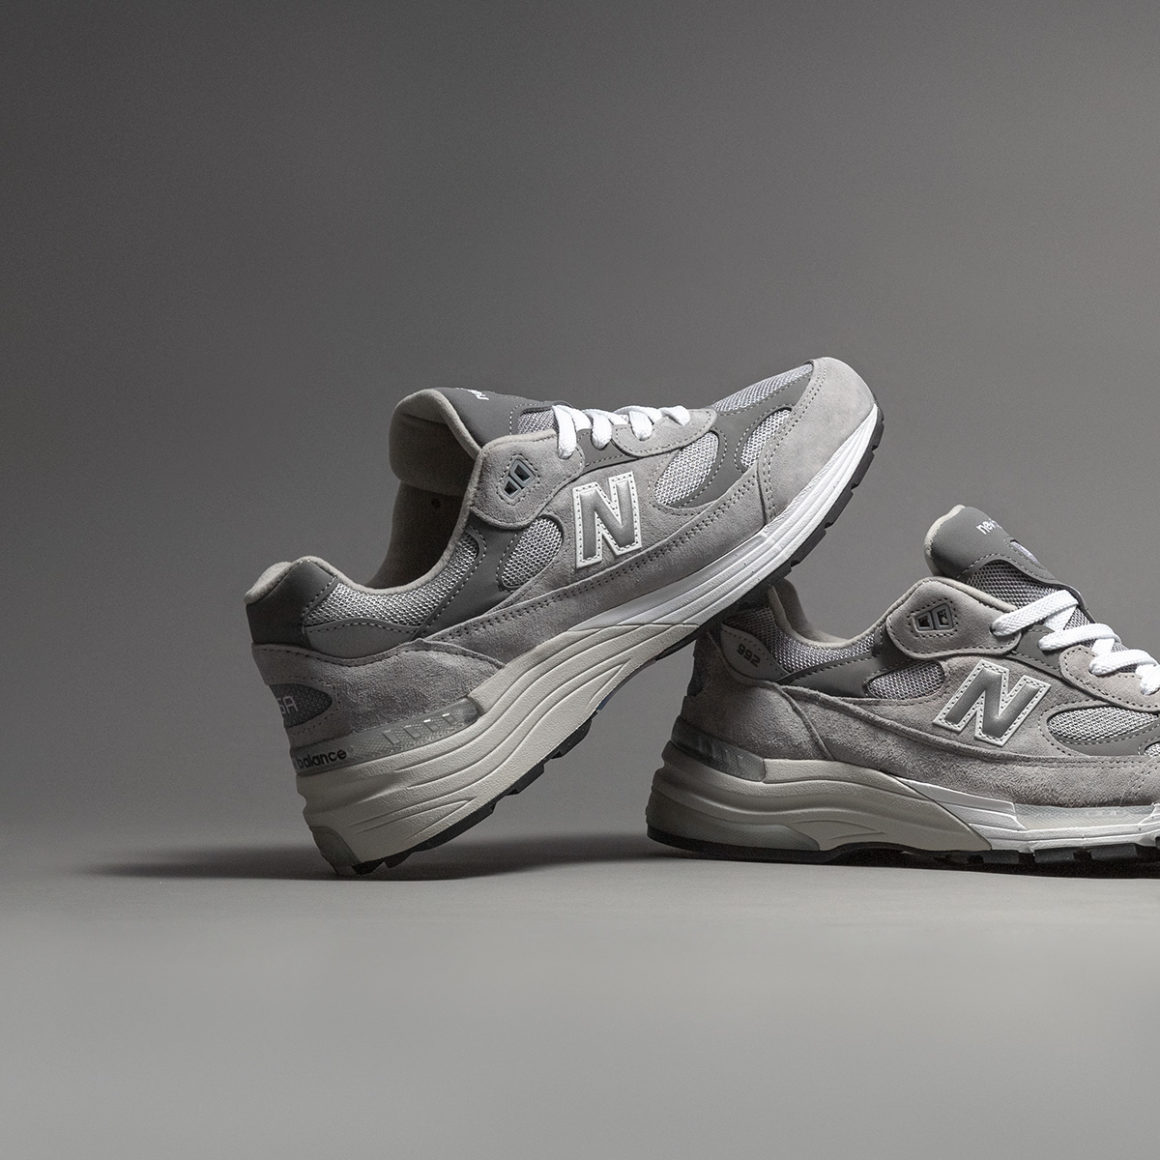 Levi's New Balance 992 M992lv Release Info | English as a Second ...